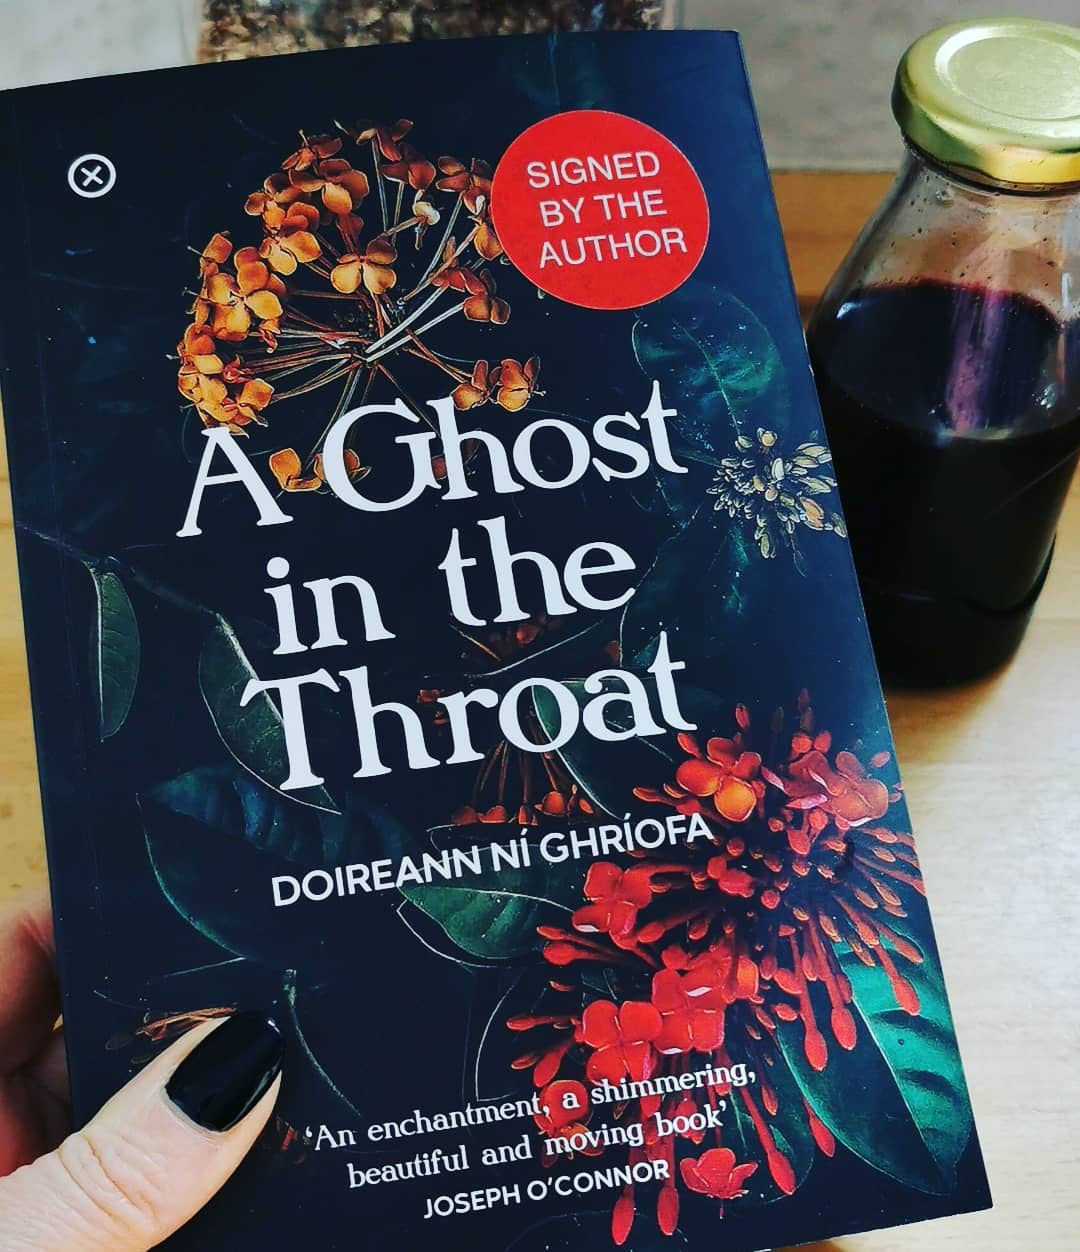 A ghost in the throat by Doireann Ni Ghriofa.
Really enjoyed this mix of getting to know about Doireann and her life as well as her utter fascination with Eibhlin Dubh Ni Chonaill. Eibhlin composed Caoineash, a lament for her husband Art when he was murdered and Doireann goes on a mystery research trail trying to find out why Eibhlin was deleted from history. The book also contains Doireann’s translation of the poem.
This book was a easy but challenging read and one I read ultra quickly. Recommended from me!